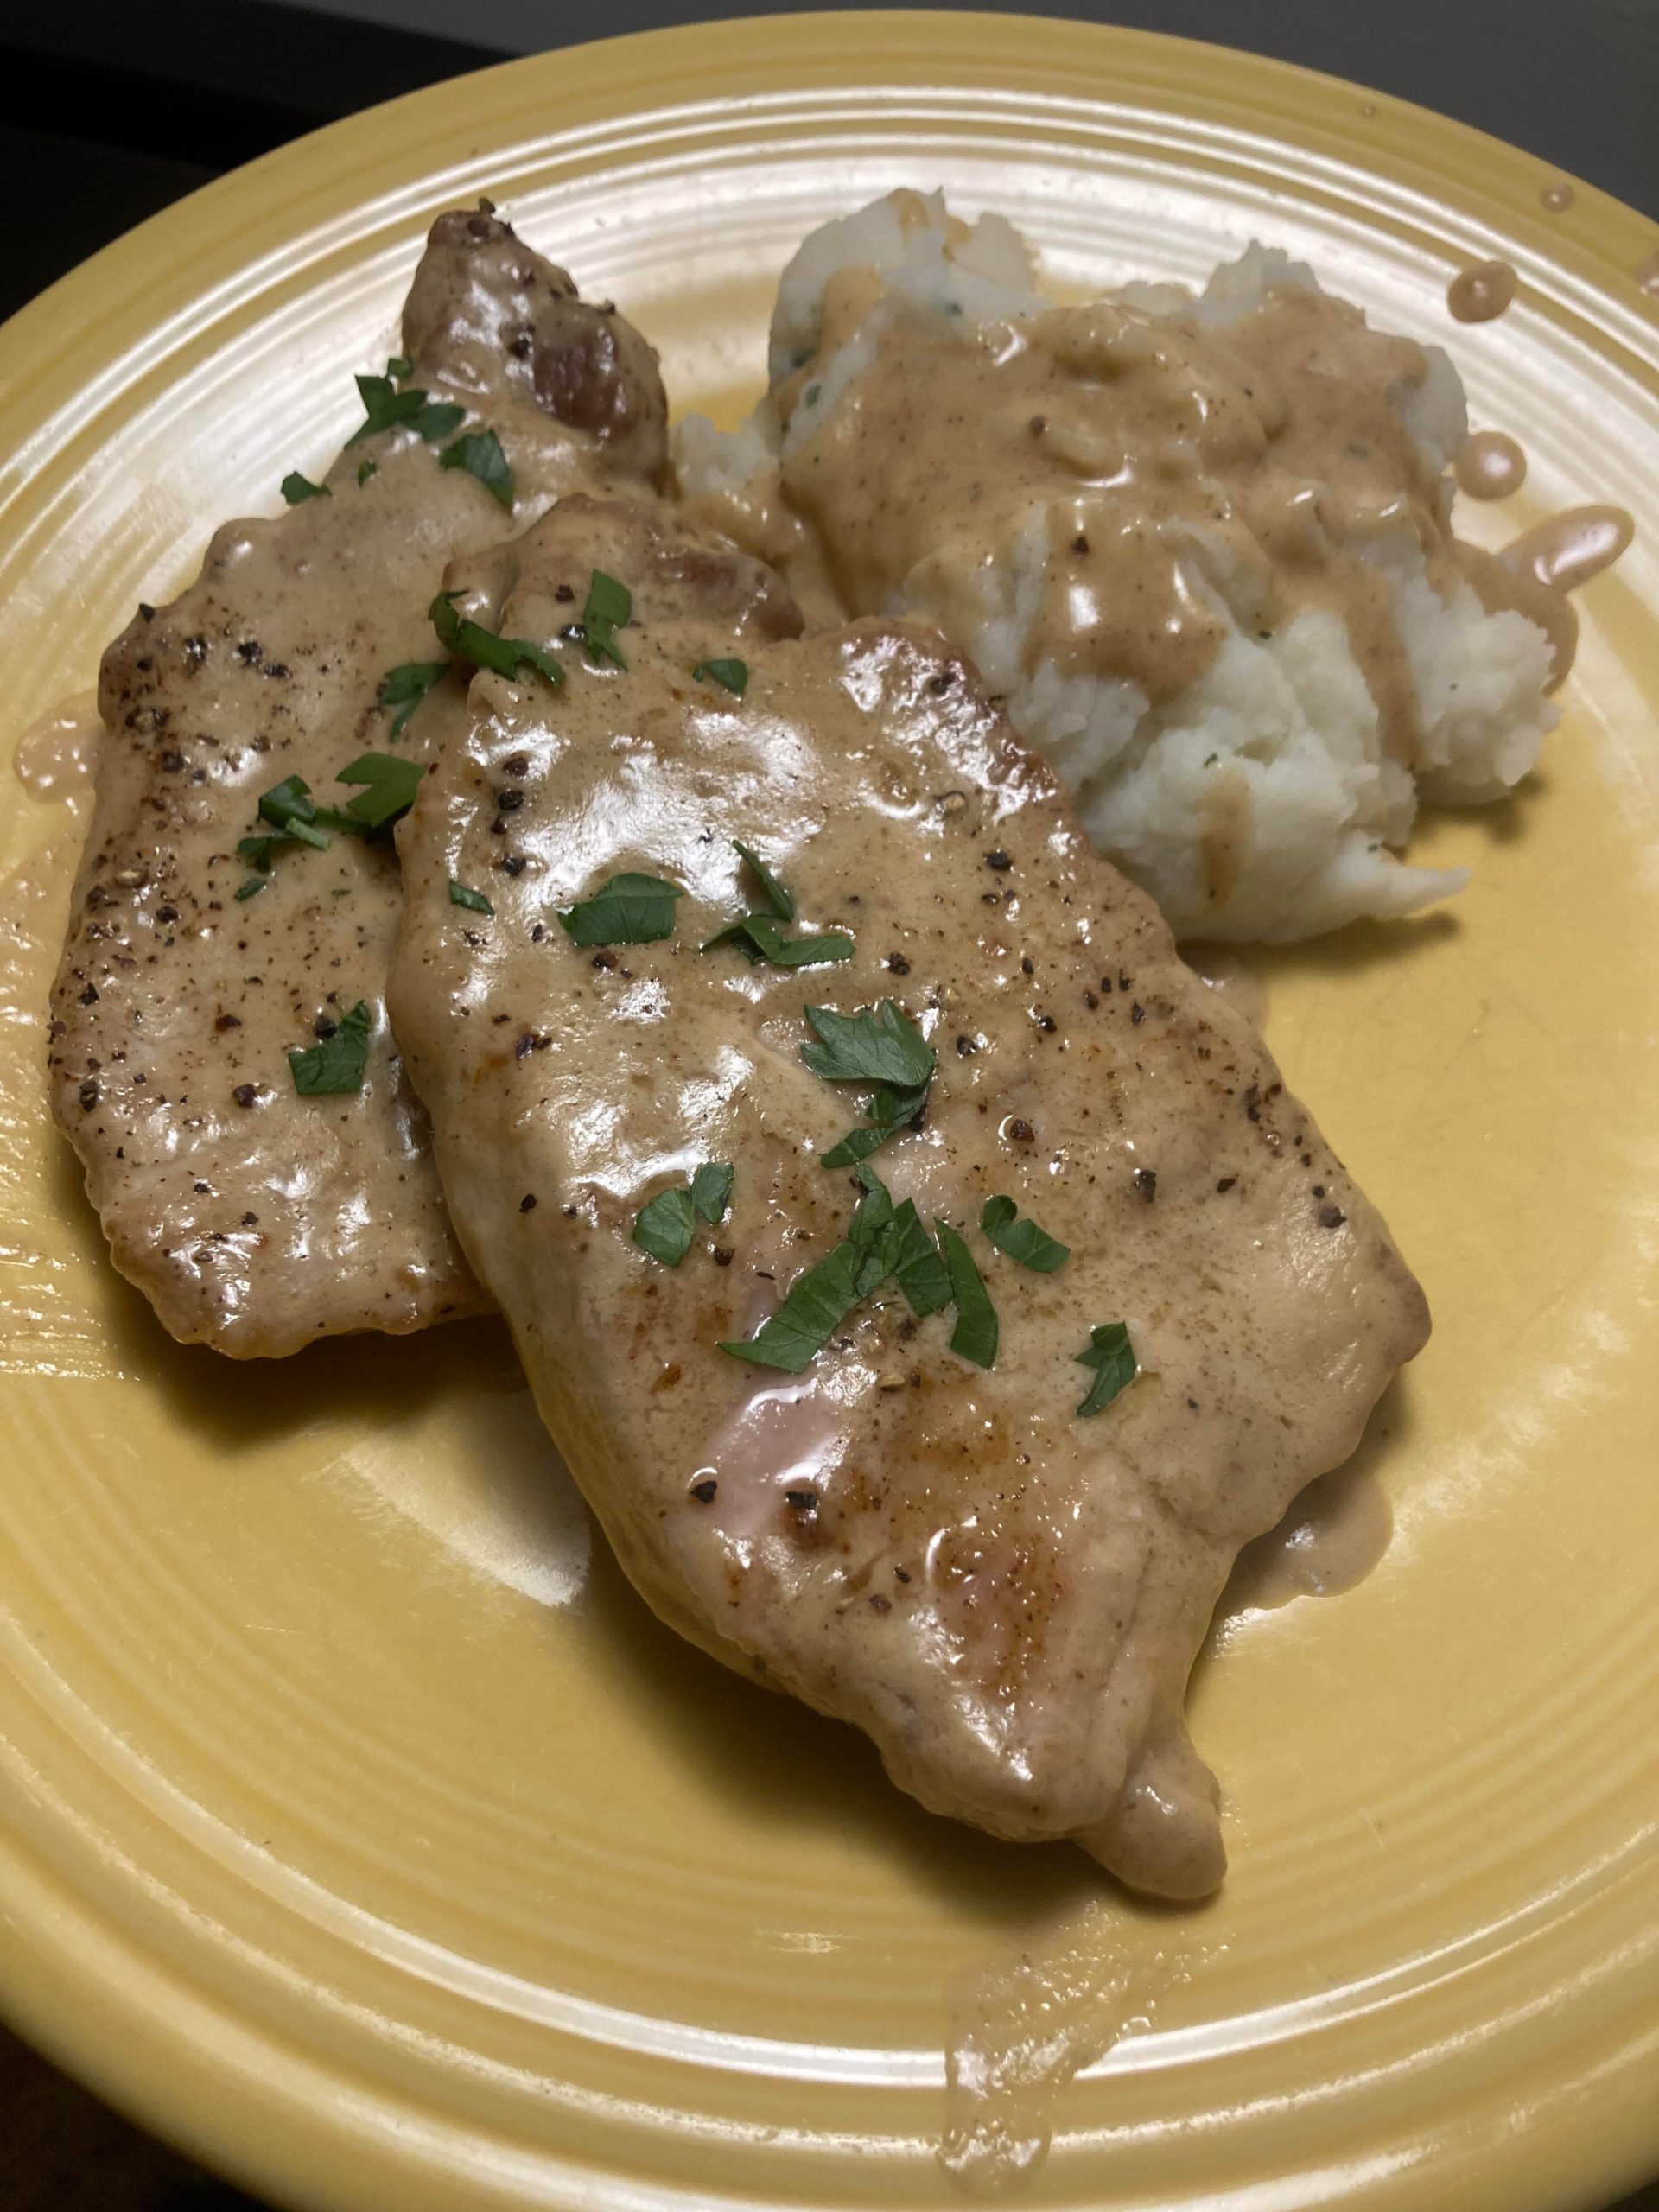 Smothered pork chops with a side of mashed potatoes. - Dining and Cooking